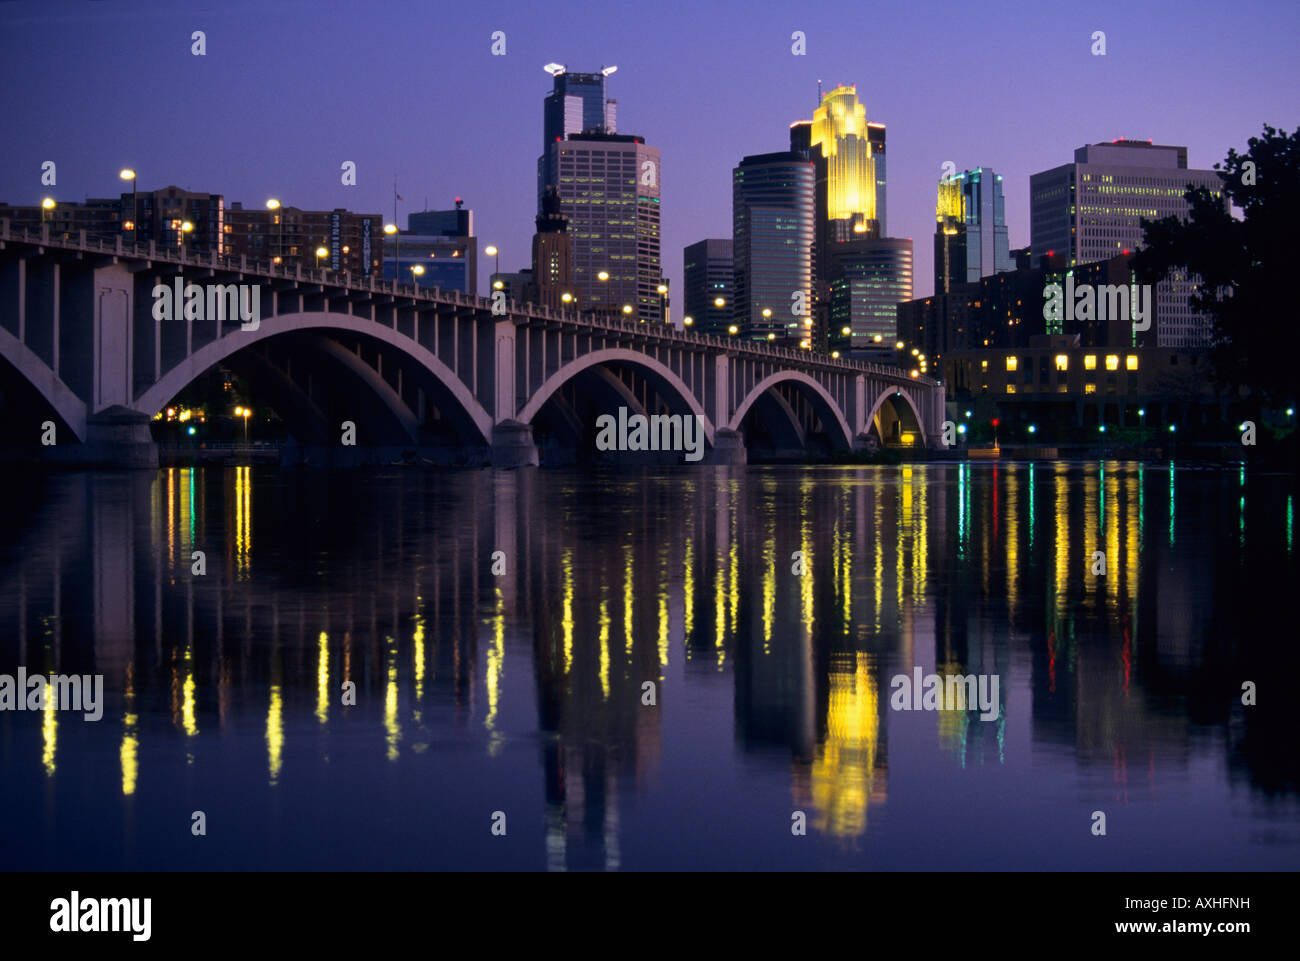 SKYLINE OF MINNEAPOLIS, MINNESOTA, THE MISSISSIPPI RIVER AND THE THIRD AVENUE-CENTRAL AVENUE BRIDGE AT DUSK. Stock Photo